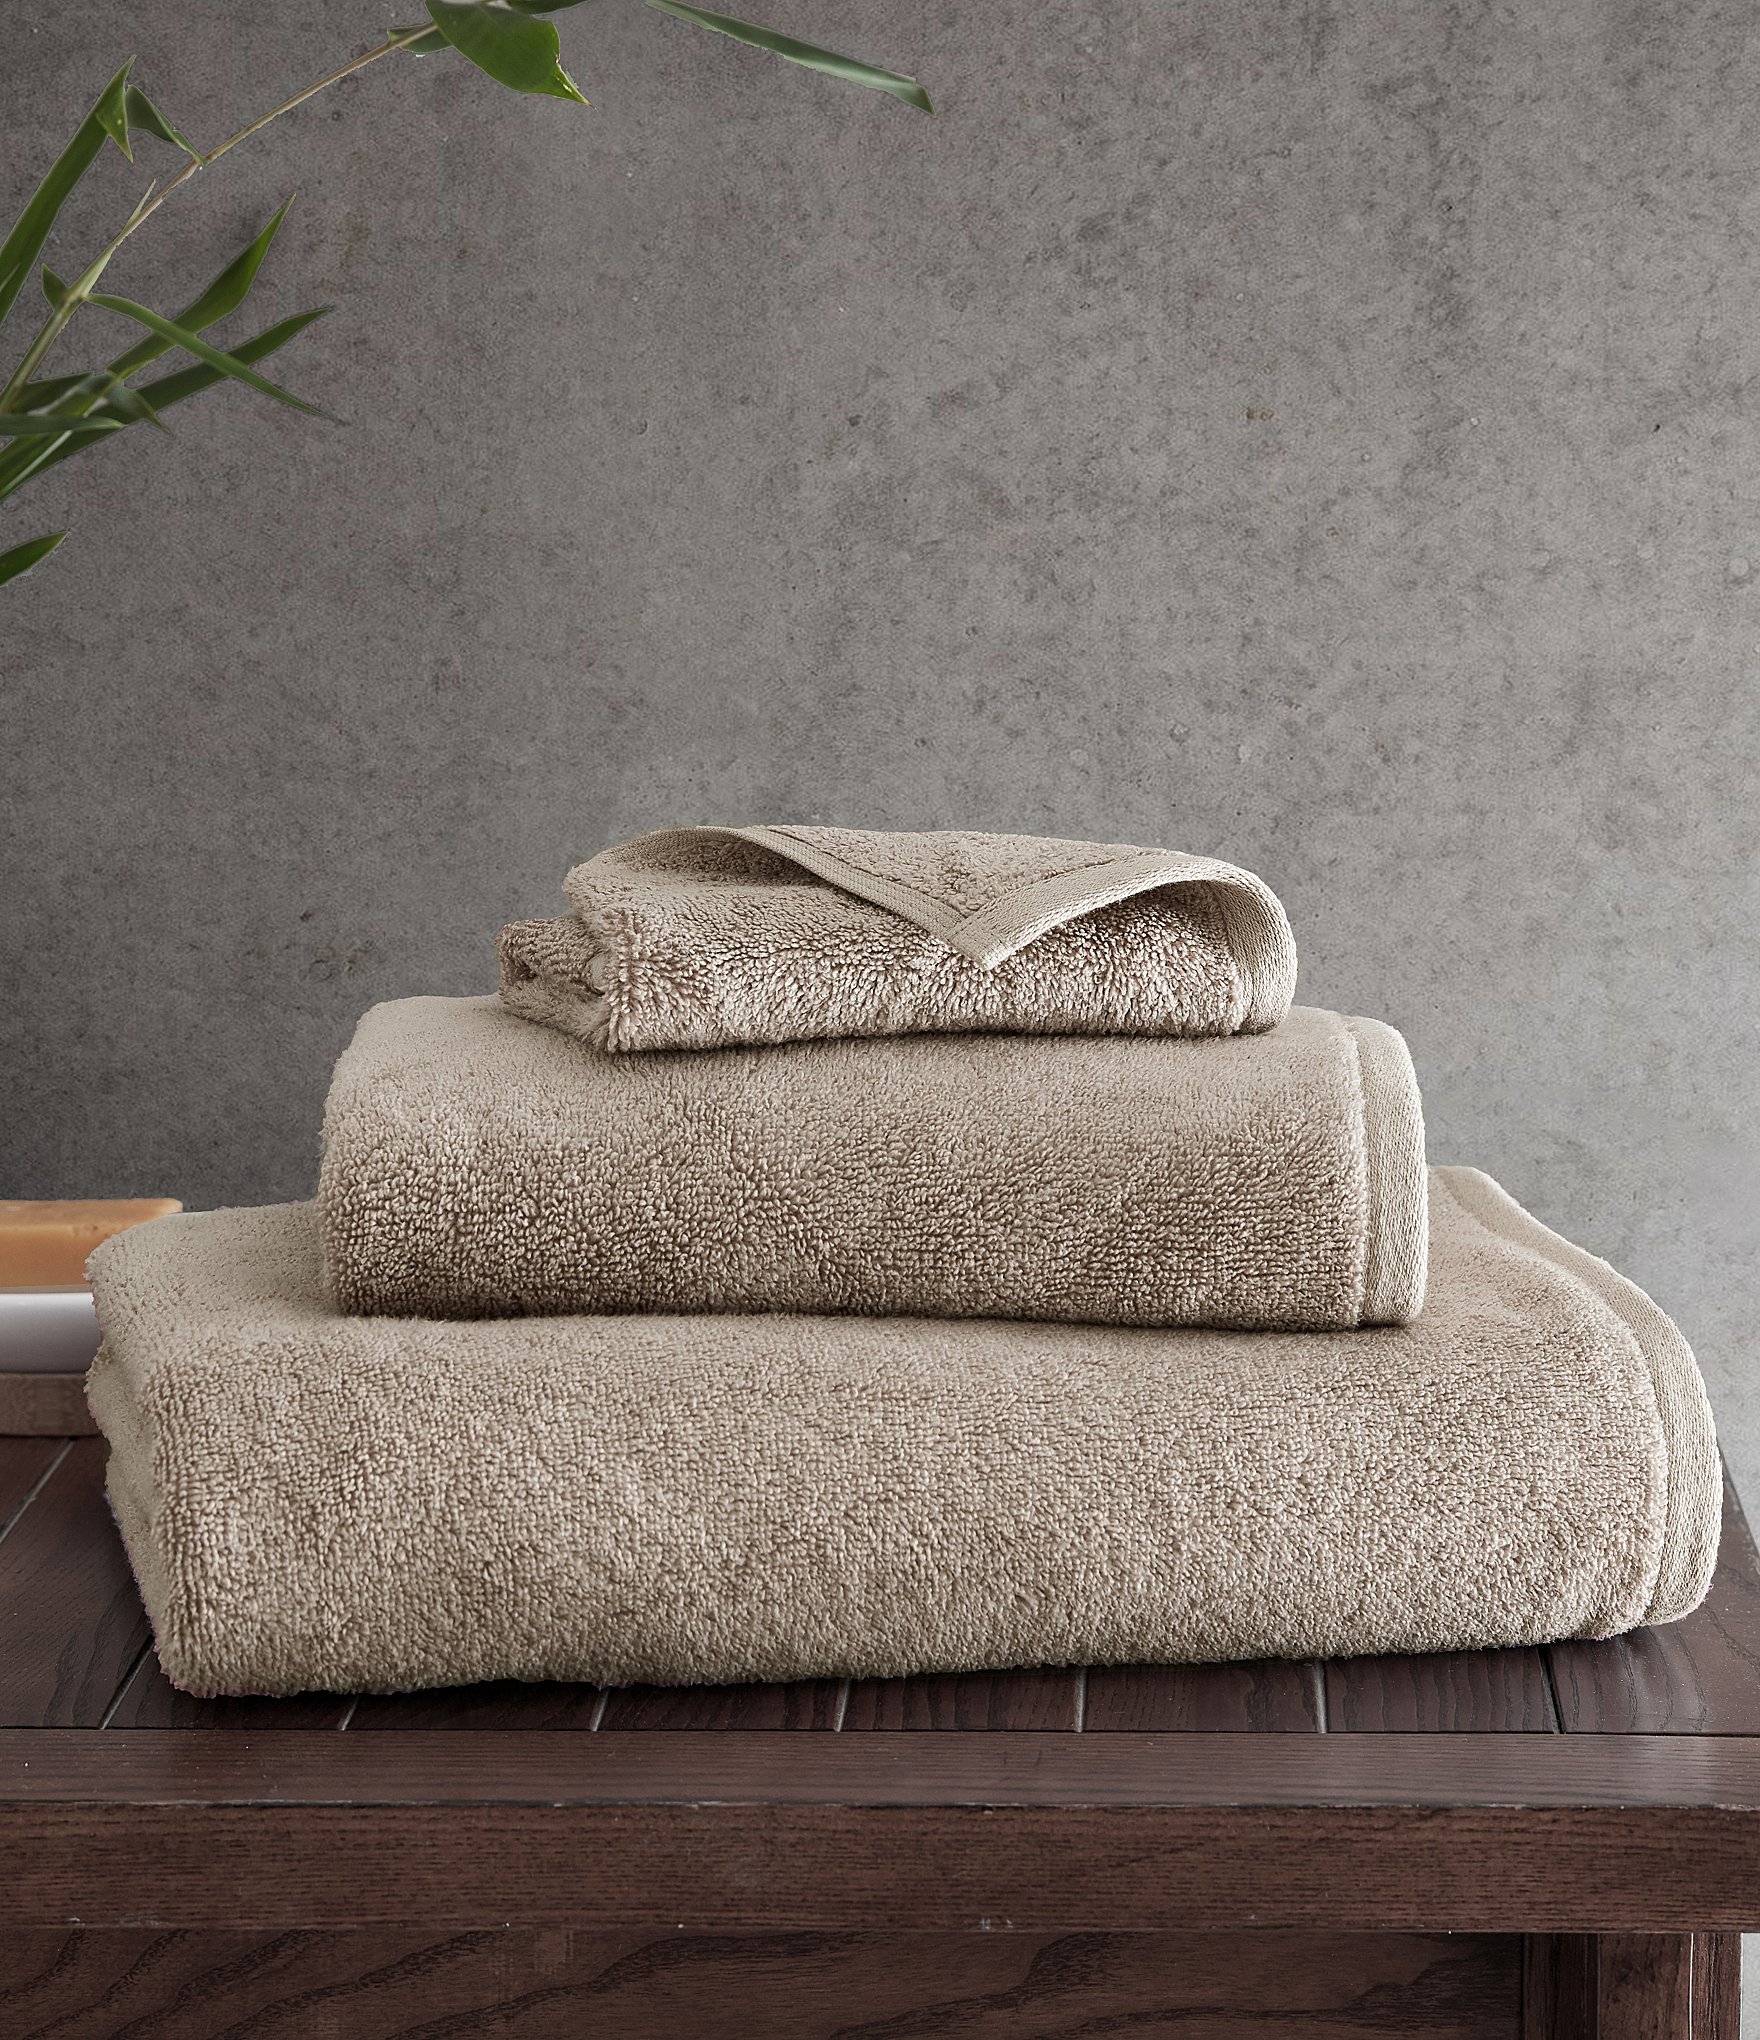 https://dimg.dillards.com/is/image/DillardsZoom/zoom/bamboo-bliss-resort-bamboo-collection-by-rhh-bath-towels/00000000_zi_026a5f0f-7beb-416a-9bbe-3d28a4390dba.jpg